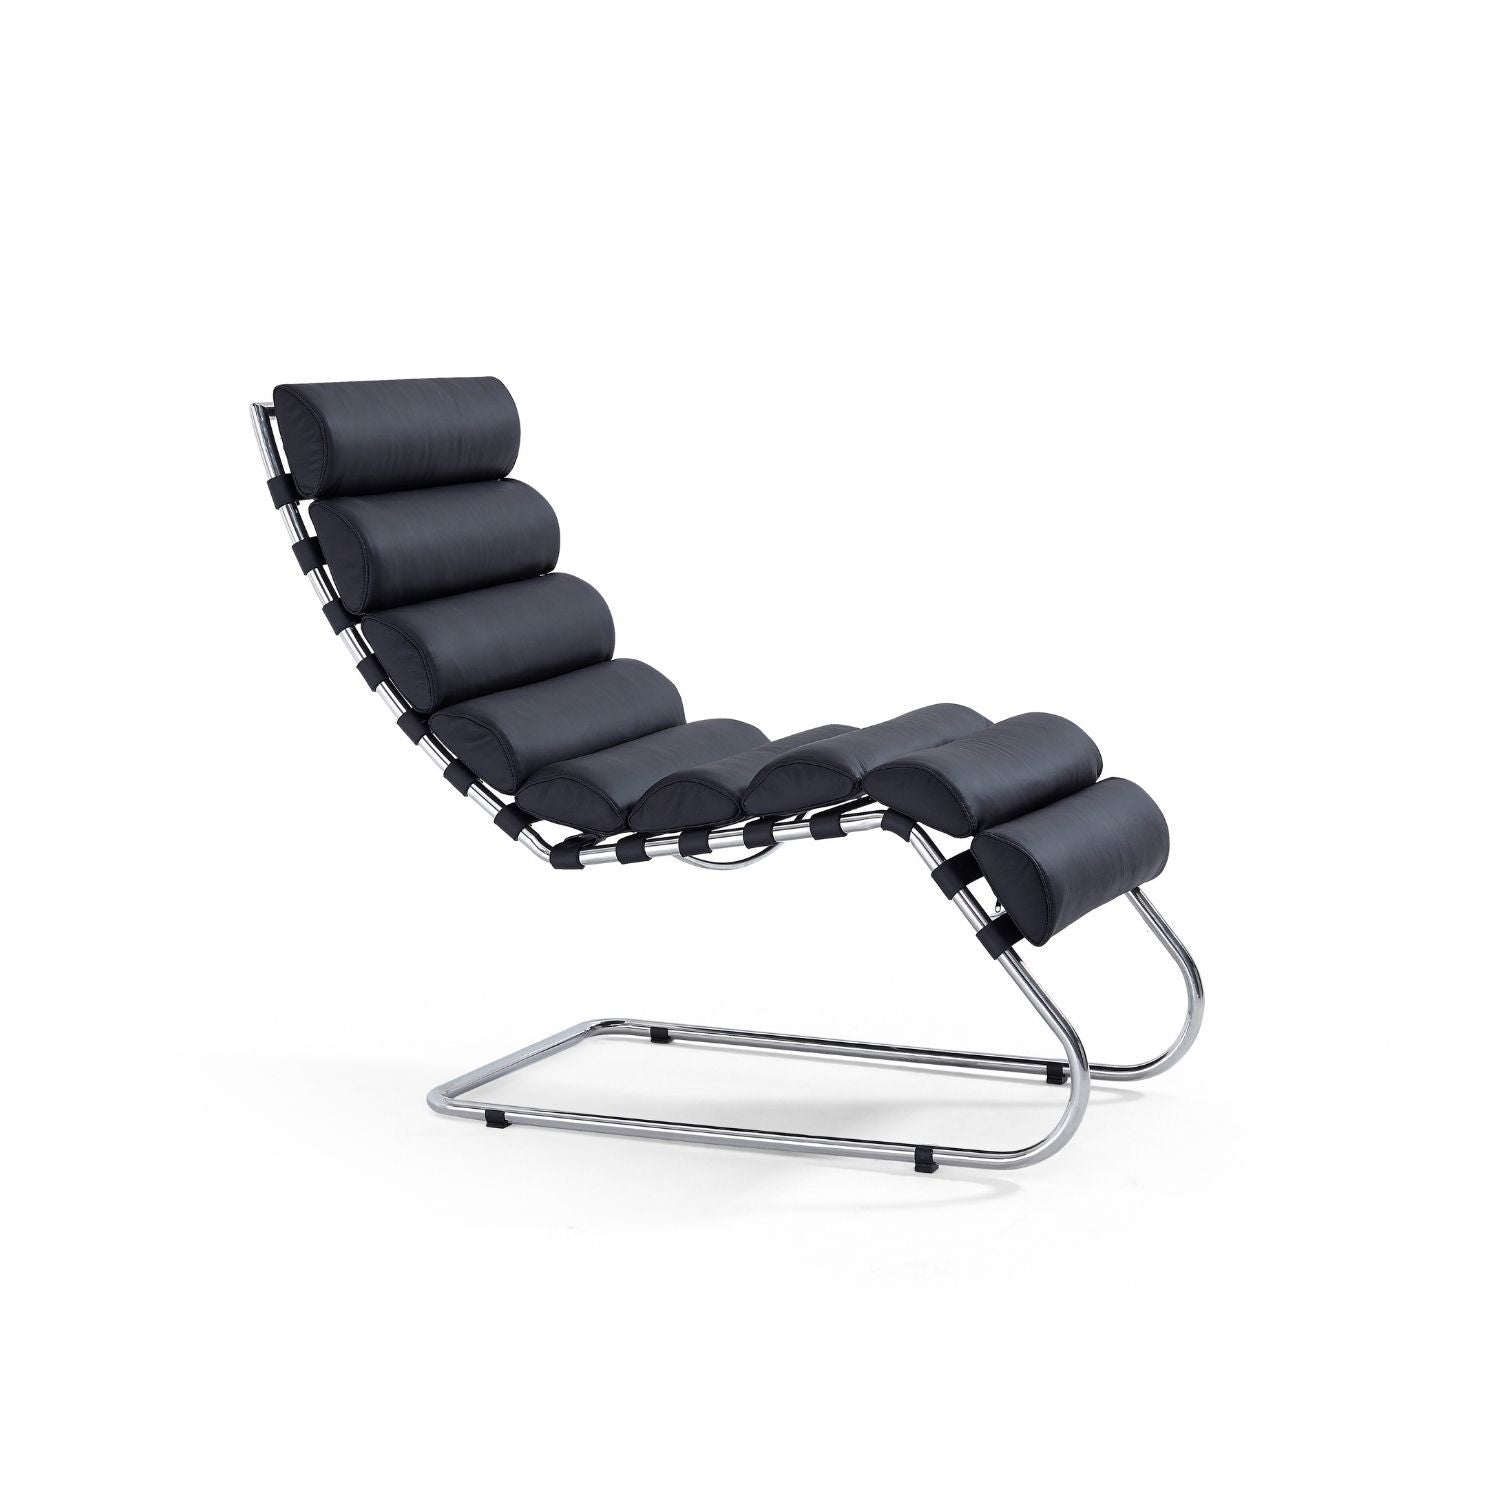 Edward Lounge Chair - Valyou 